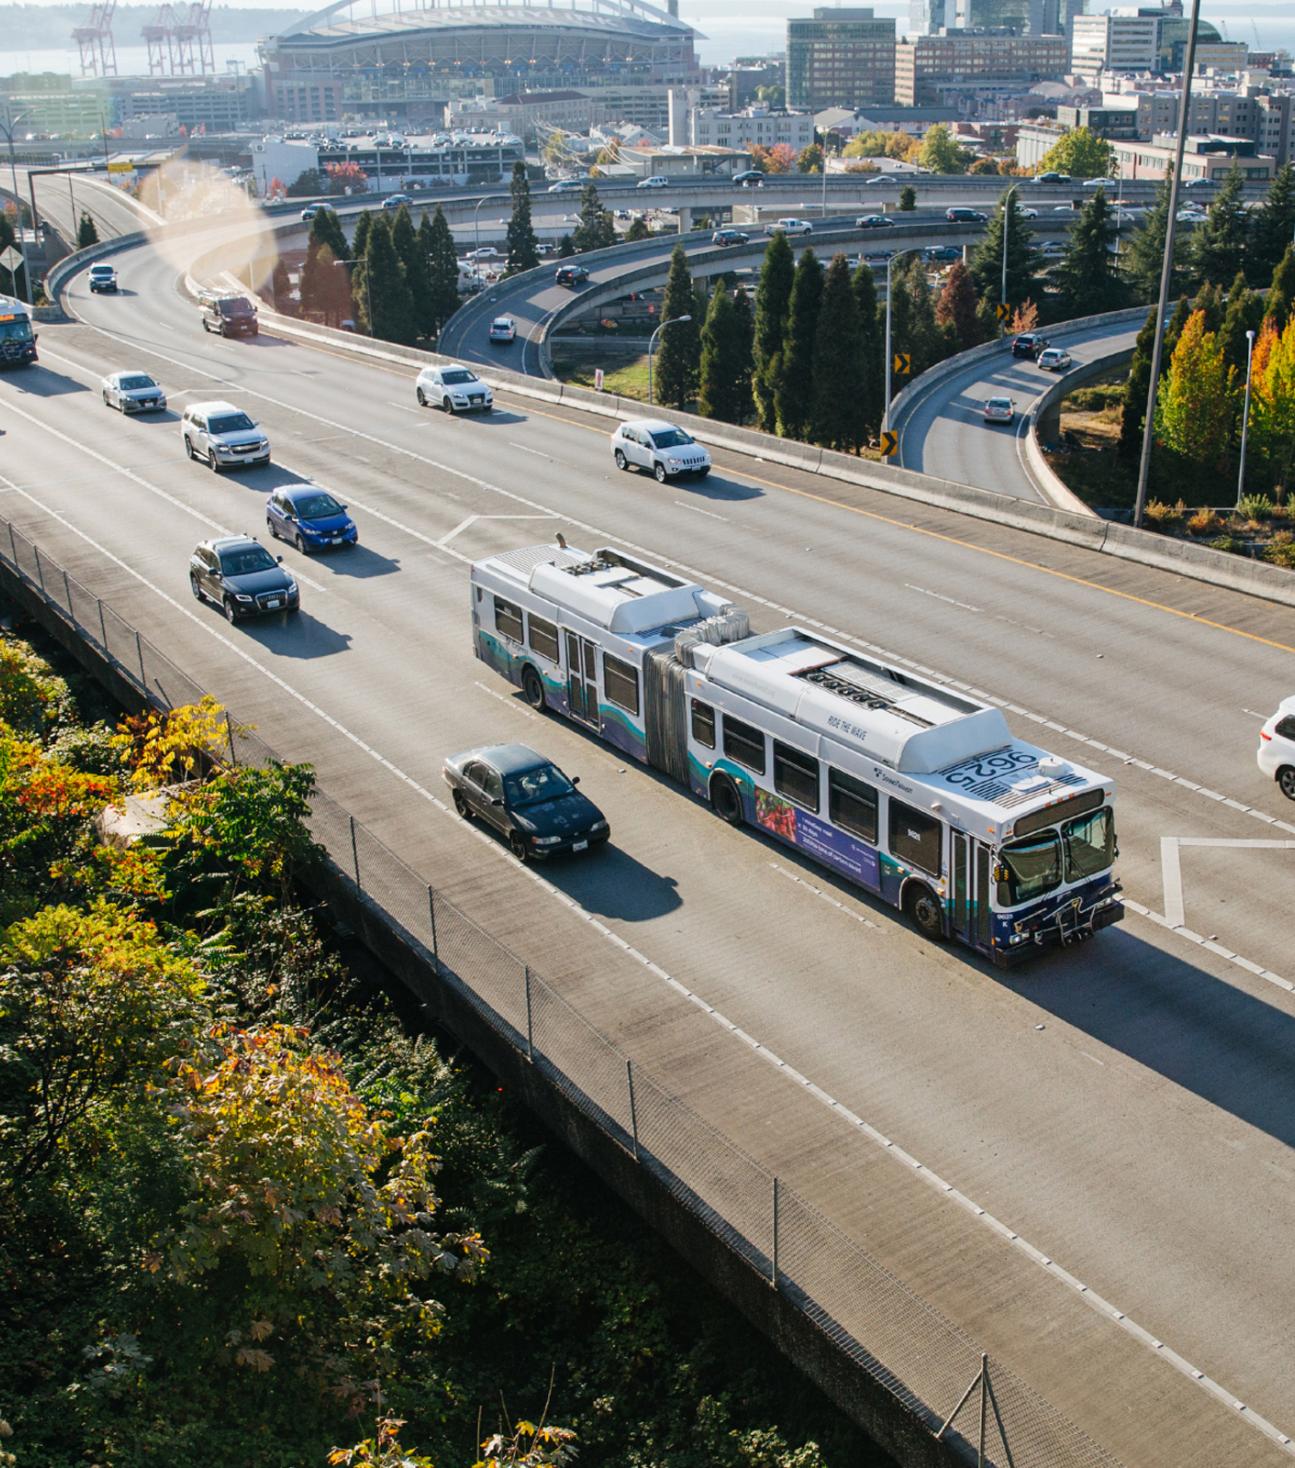 A Sound Transit express bus on the freeway with the Seattle sports stadiums in the distance.